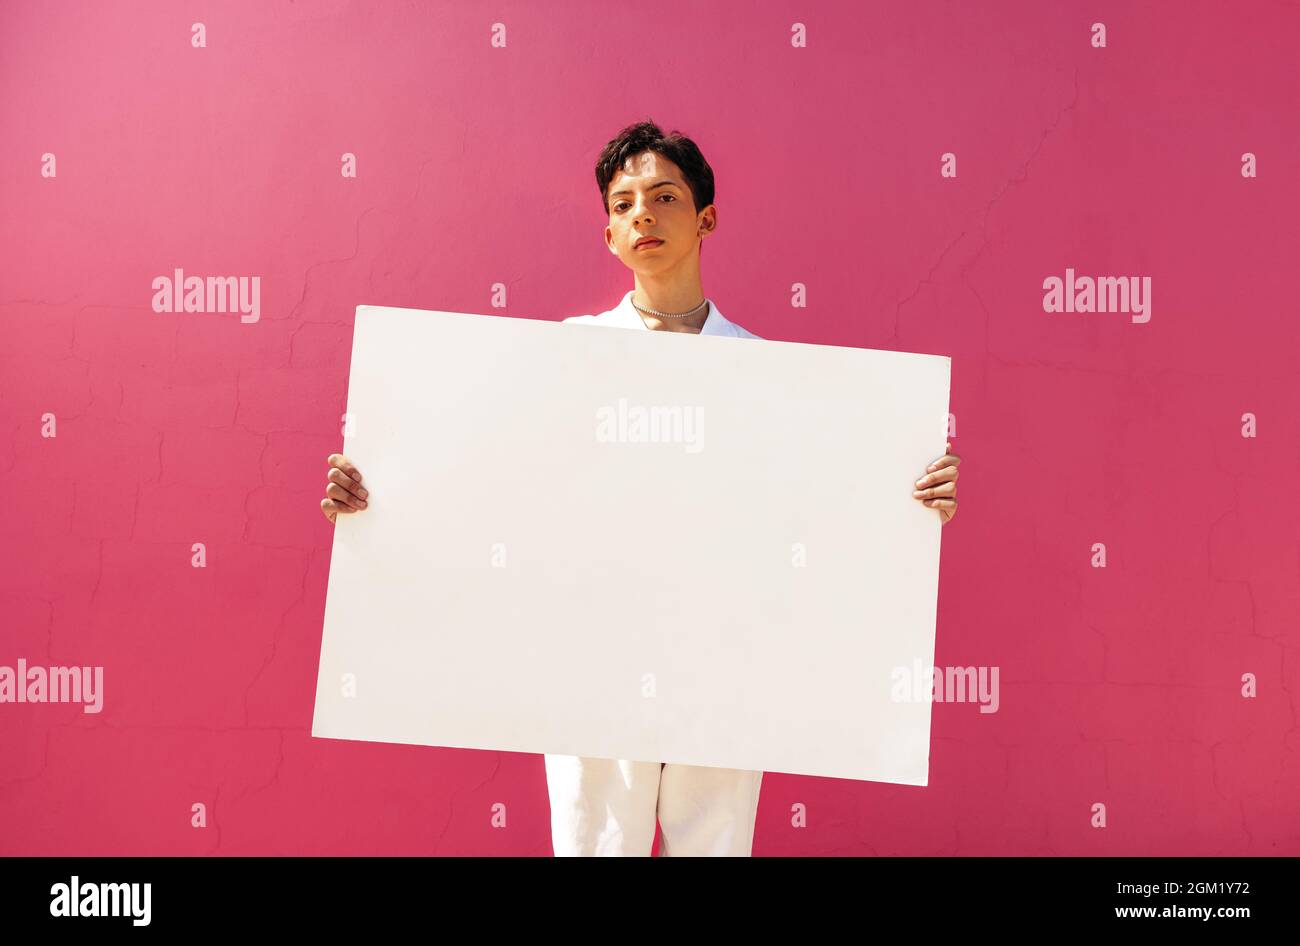 Confident queer boy holding a blank placard against a pink background. Assertive teenage activist displaying a white banner in a studio. Young gay boy Stock Photo